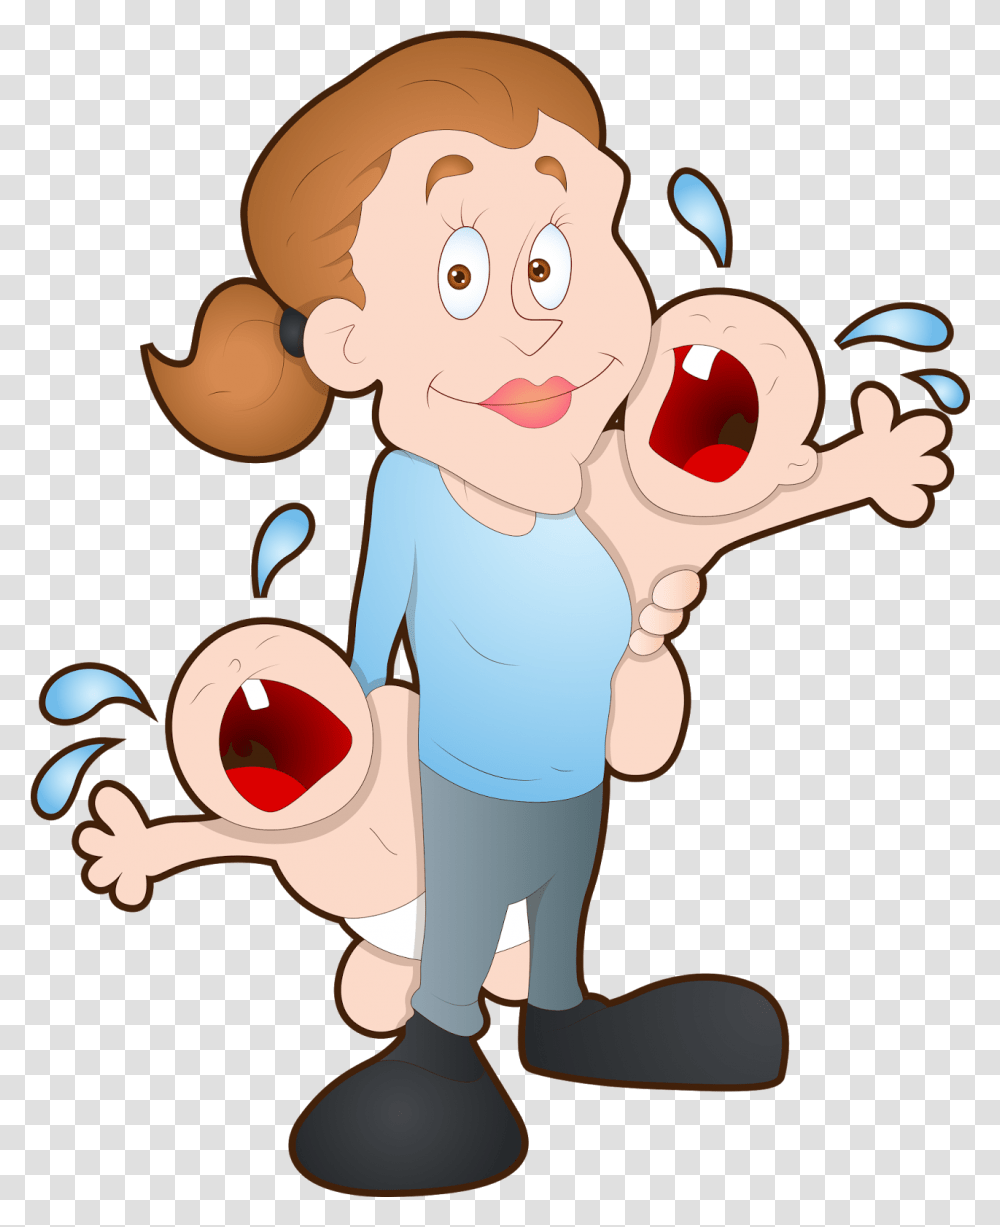 Look Clip Cartoon Look After A Baby Cartoon Cliparts Look After A Baby, Female, Face, Toy, Outdoors Transparent Png